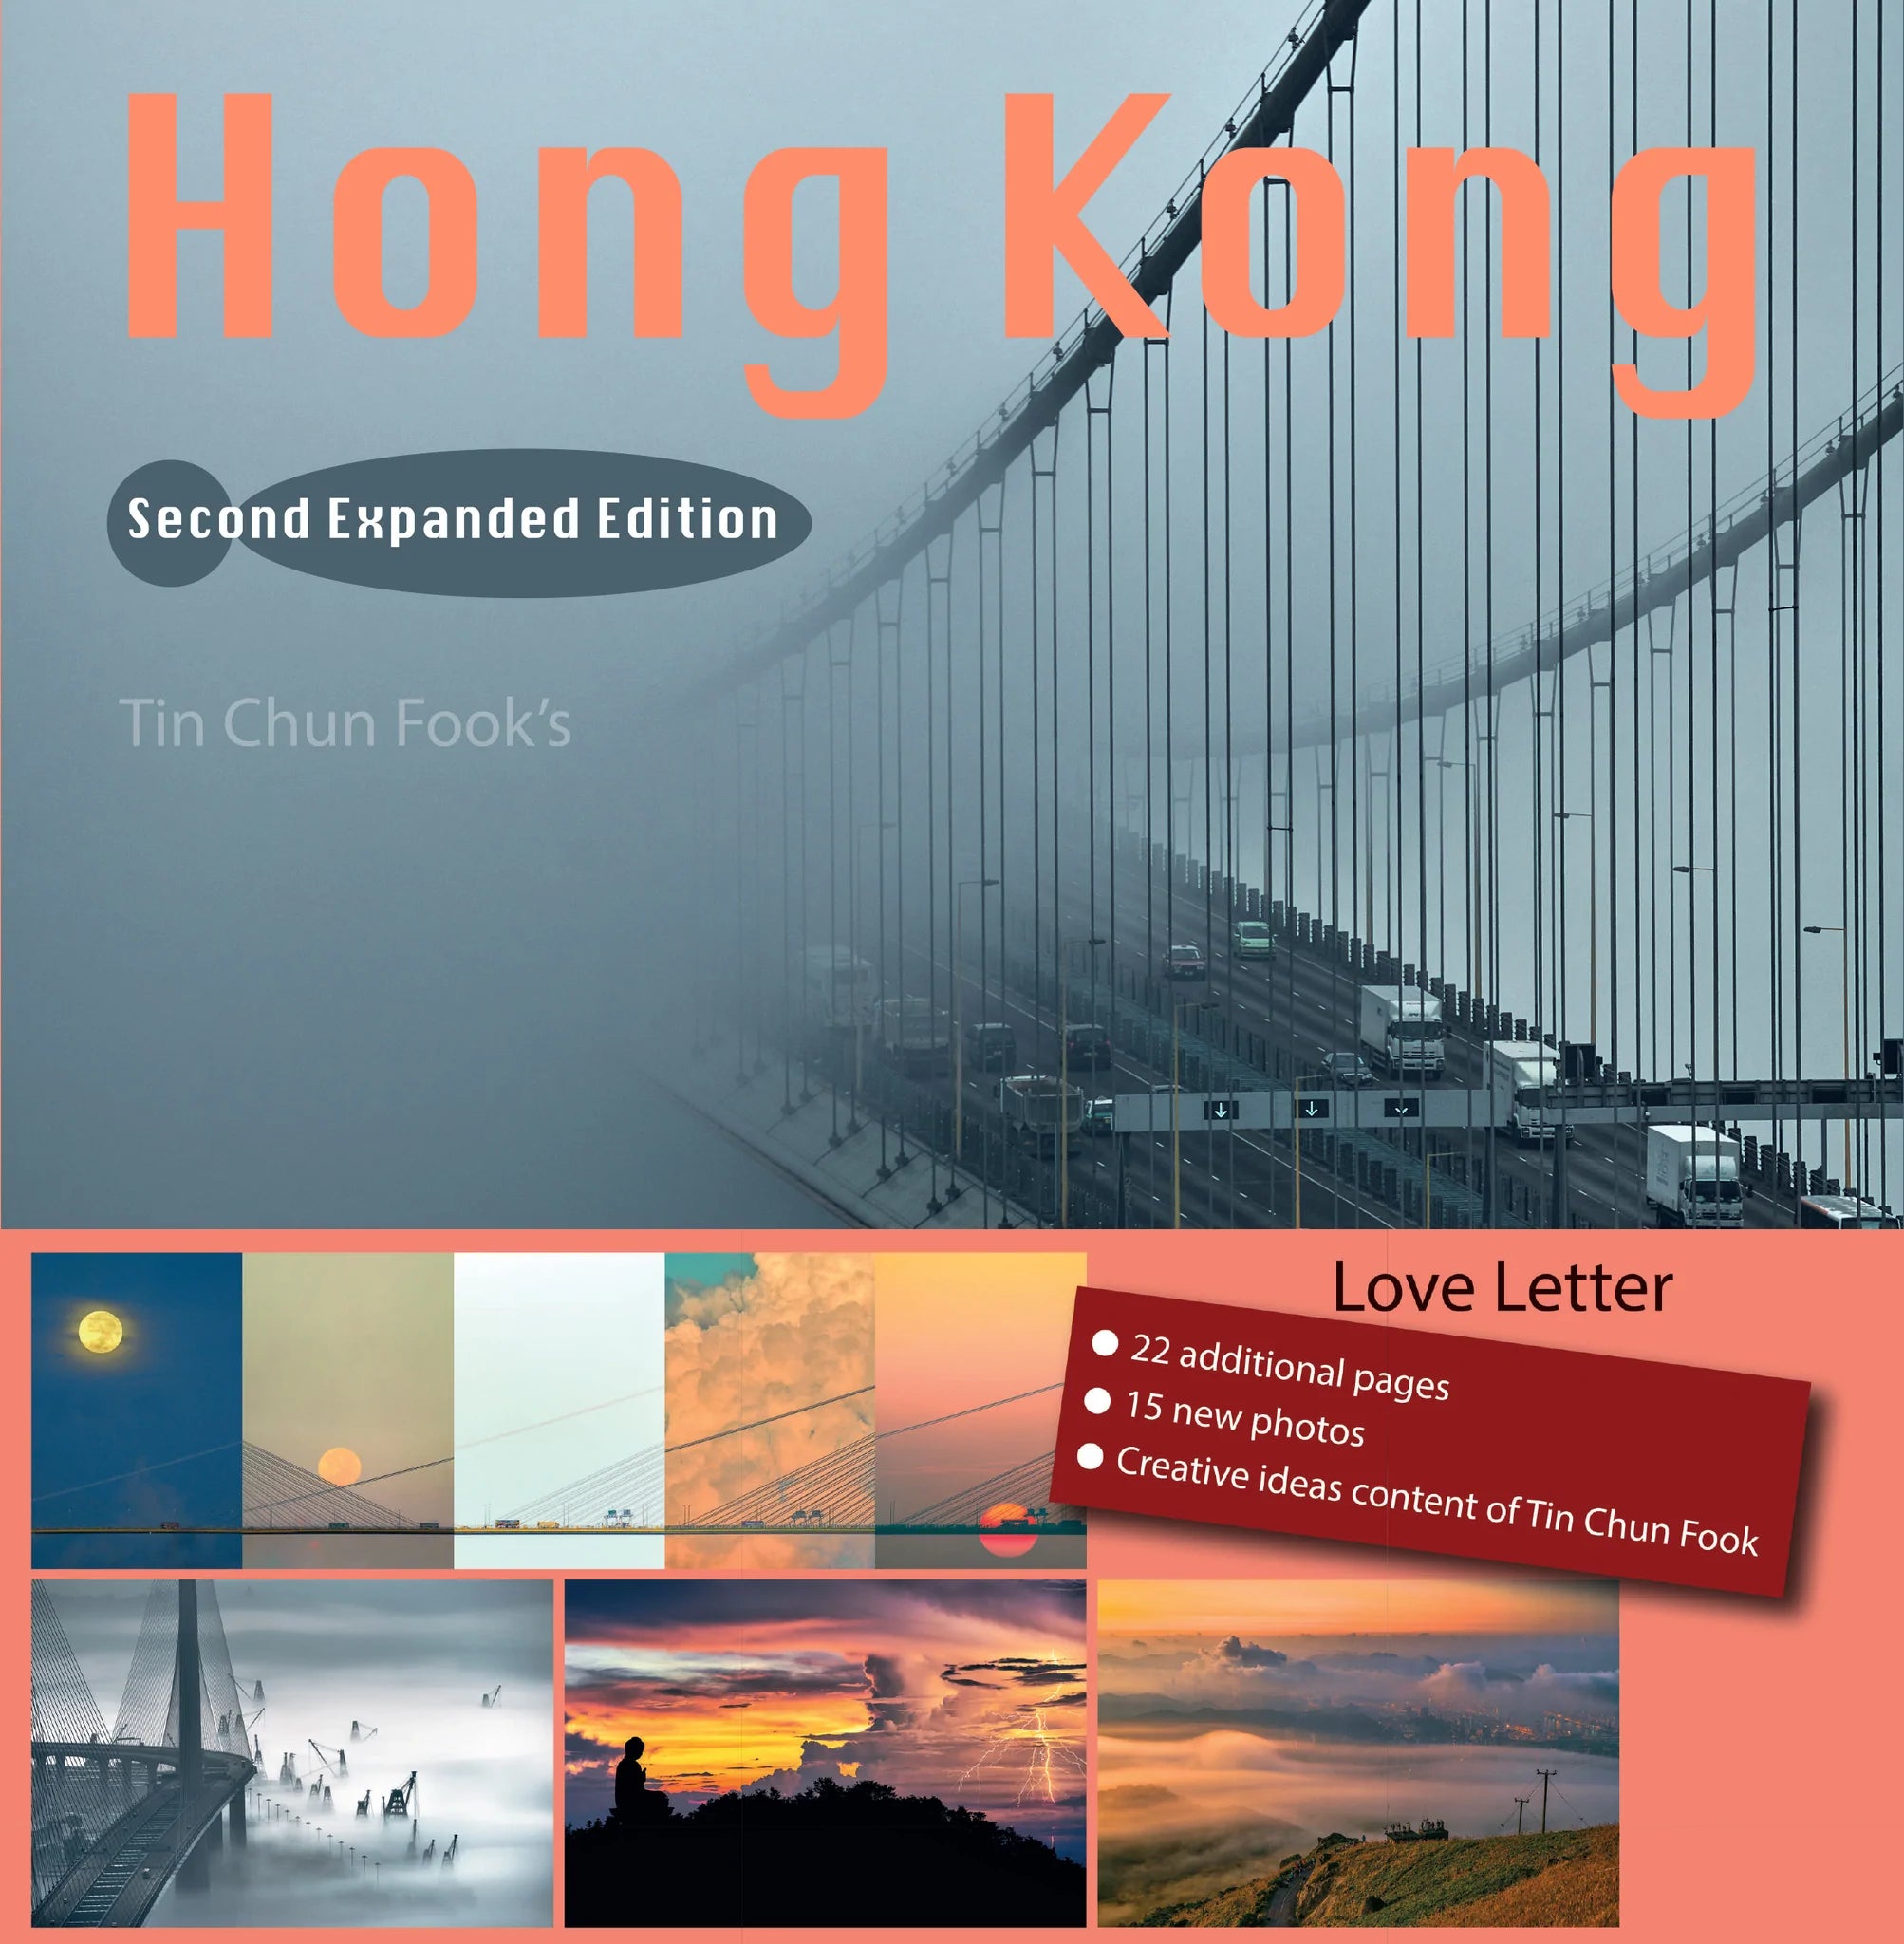 Made in Hong Kong by Tin Chun Fook (Second Edition)